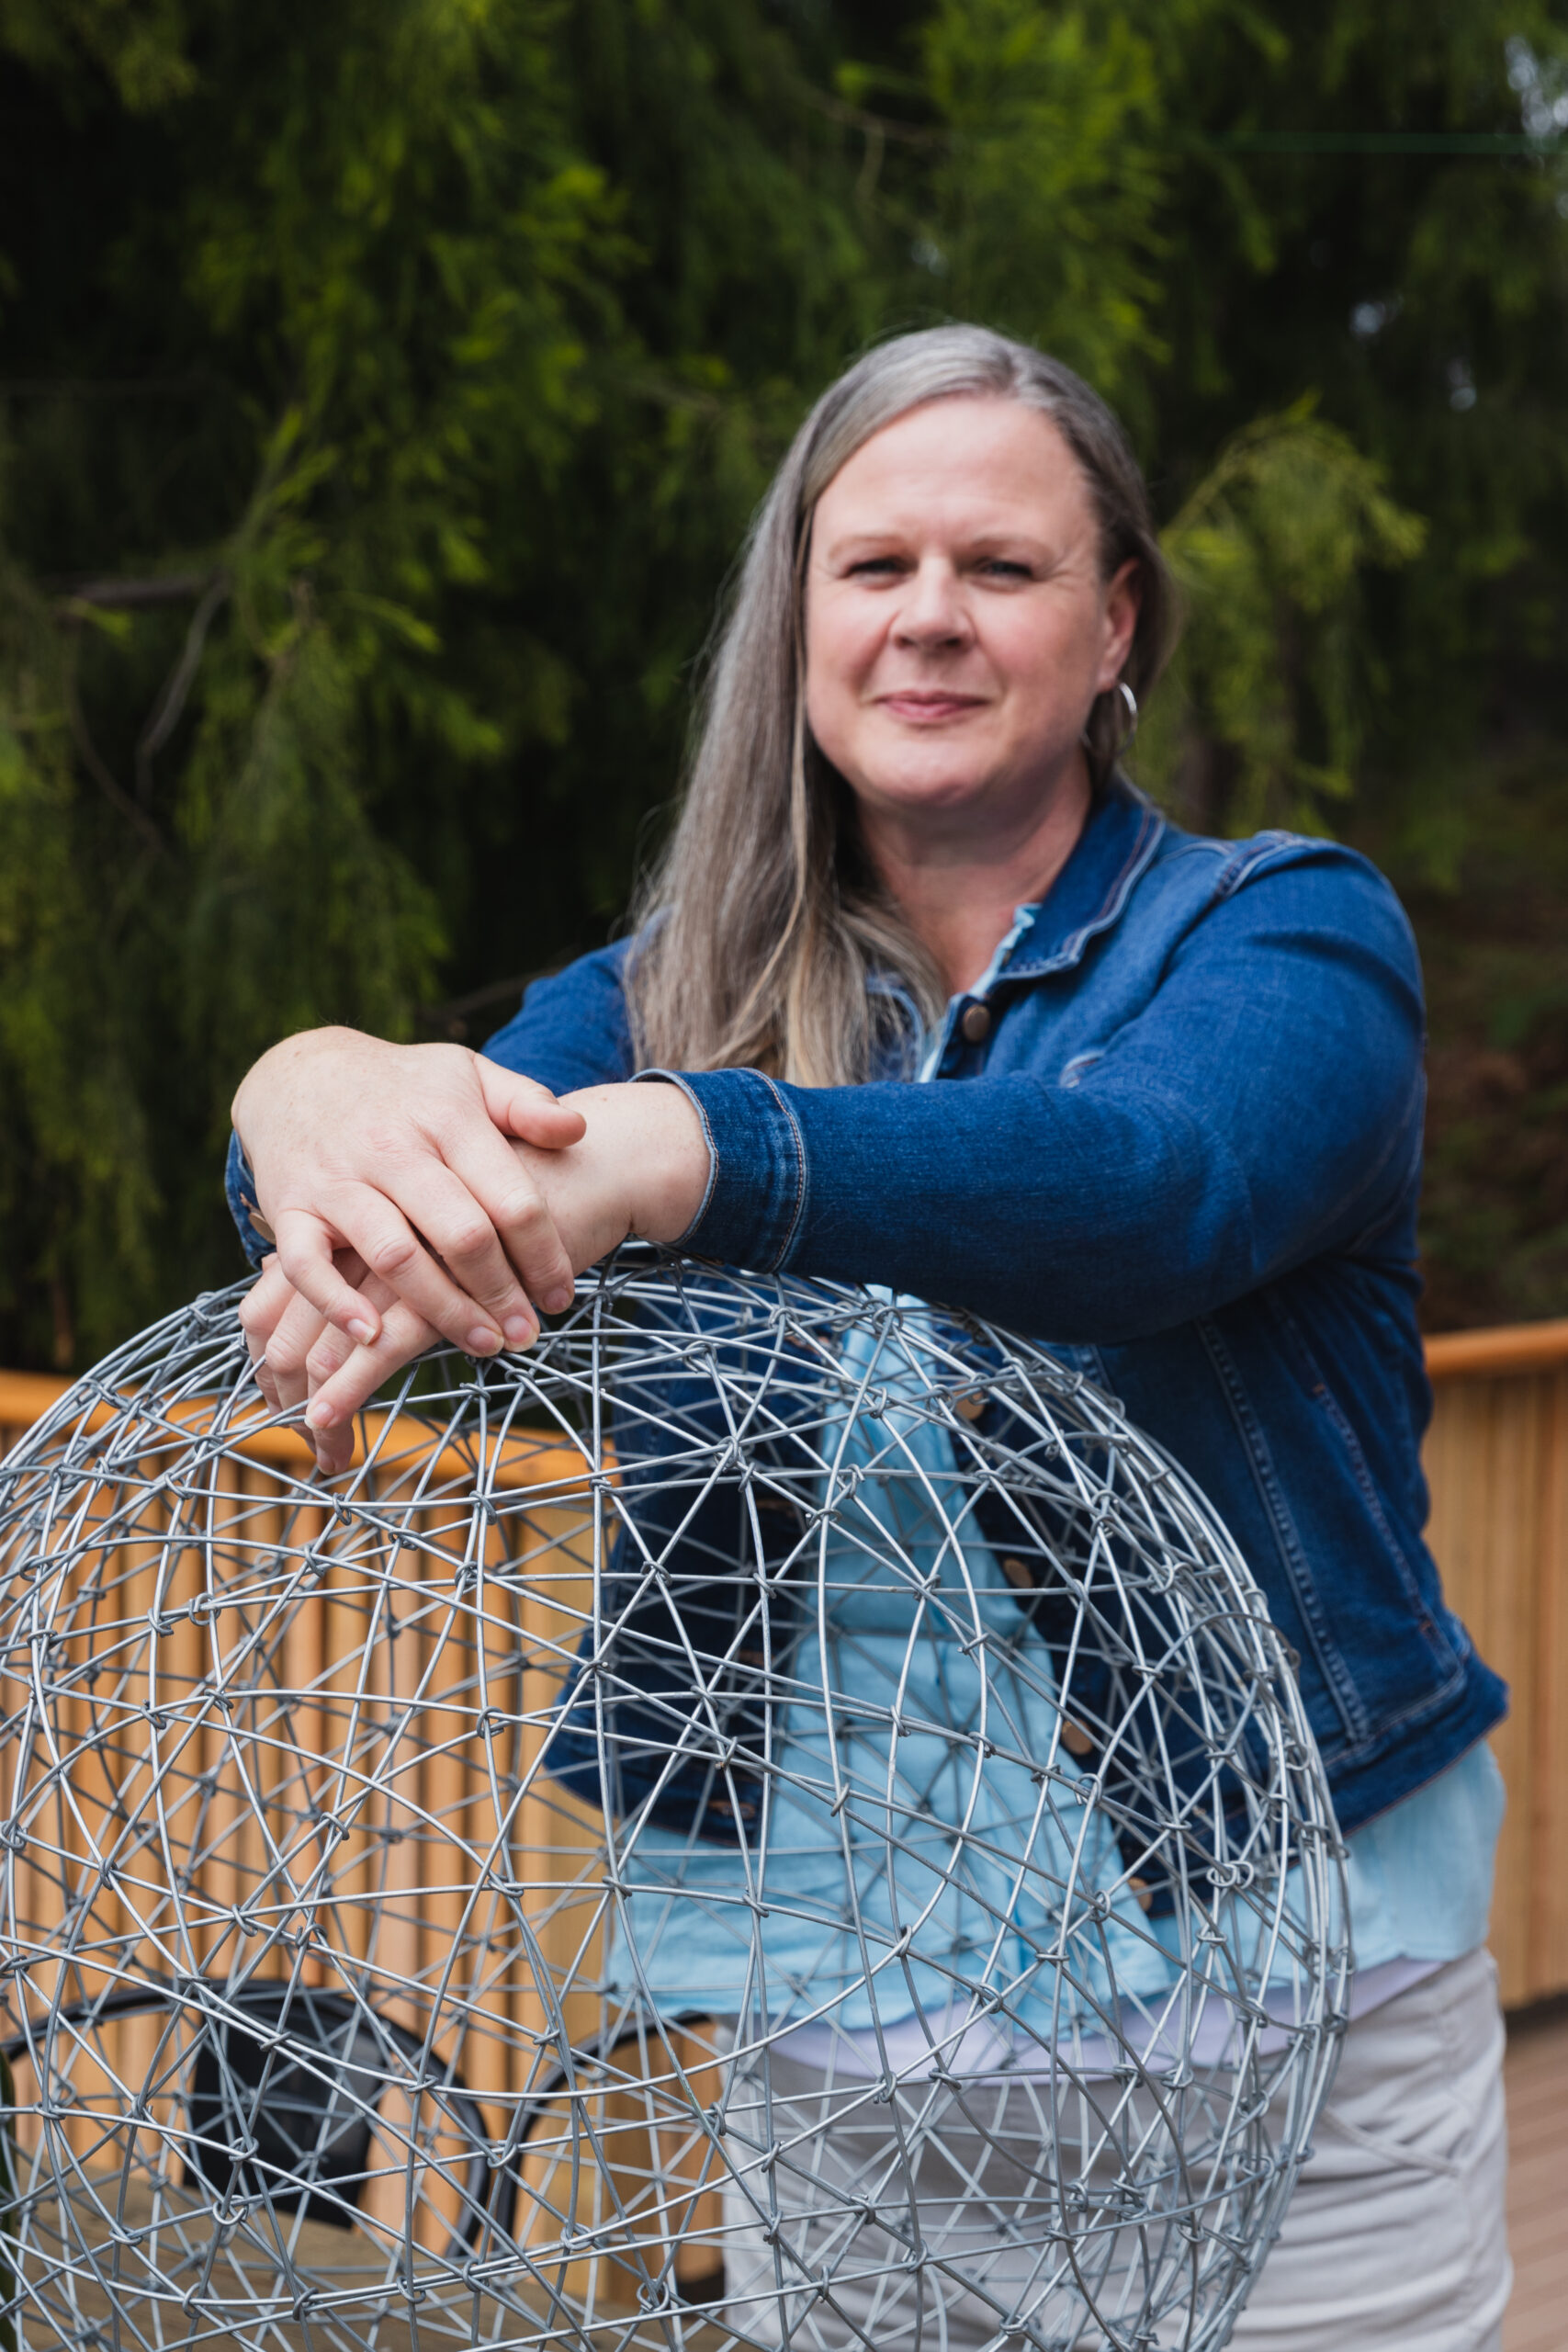 Kylie is tall, smiling and has long grey hair. Kylie is leaning on a wire sculpture. These wire sculptures are also sold at Laid Back Manor. There is a natural bush backdrop and timber handrail in the background.